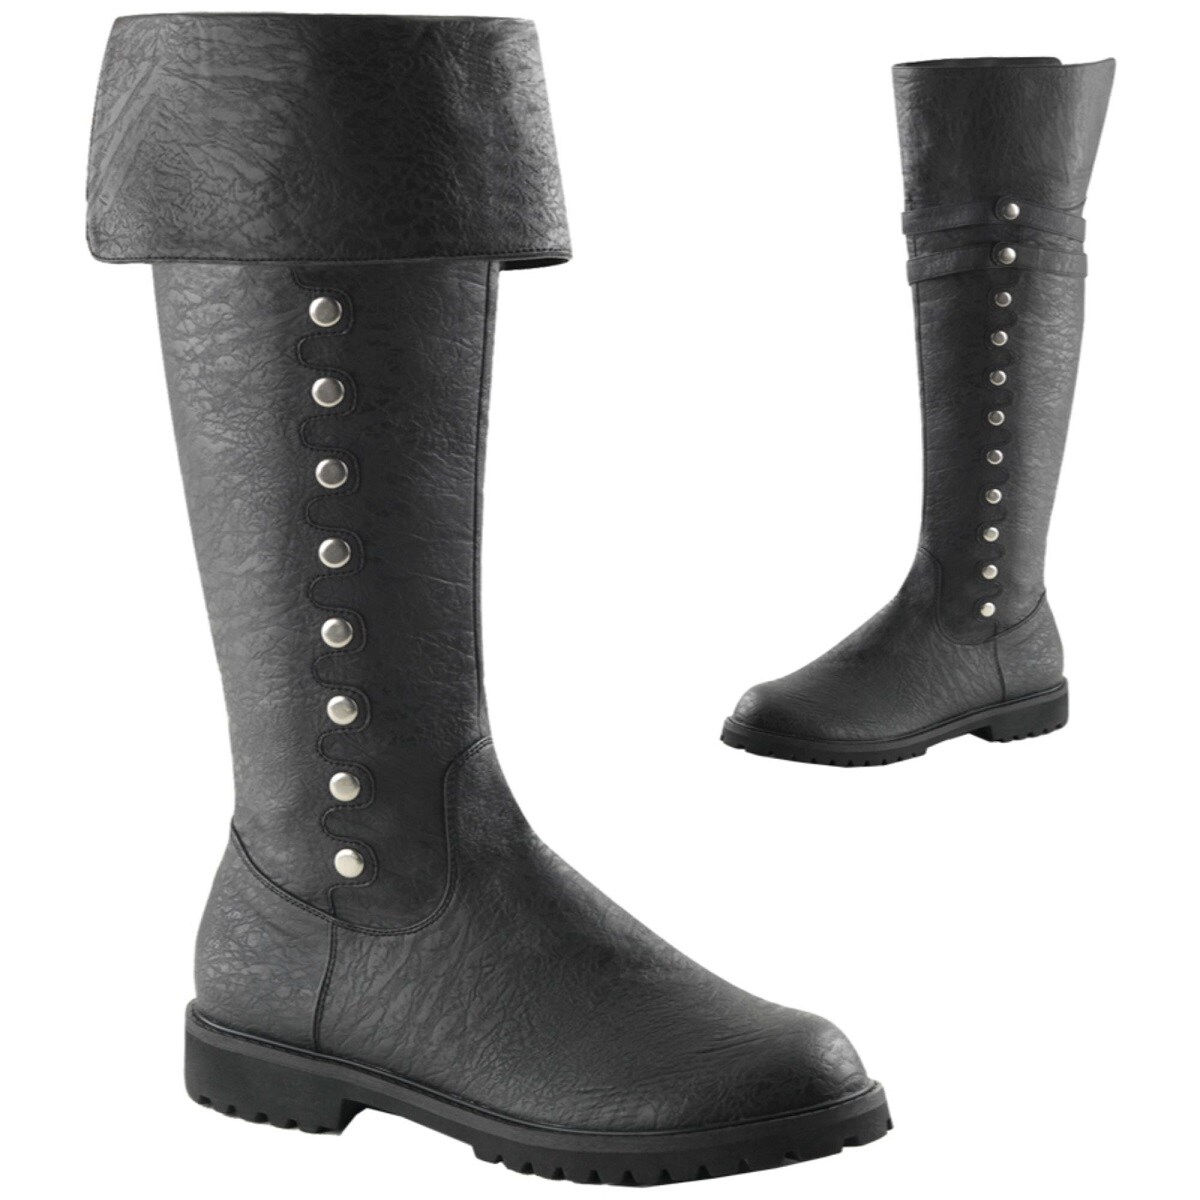 The Costume Center Black Gotham Men Adult Halloween Boots Costume Accessory - Small